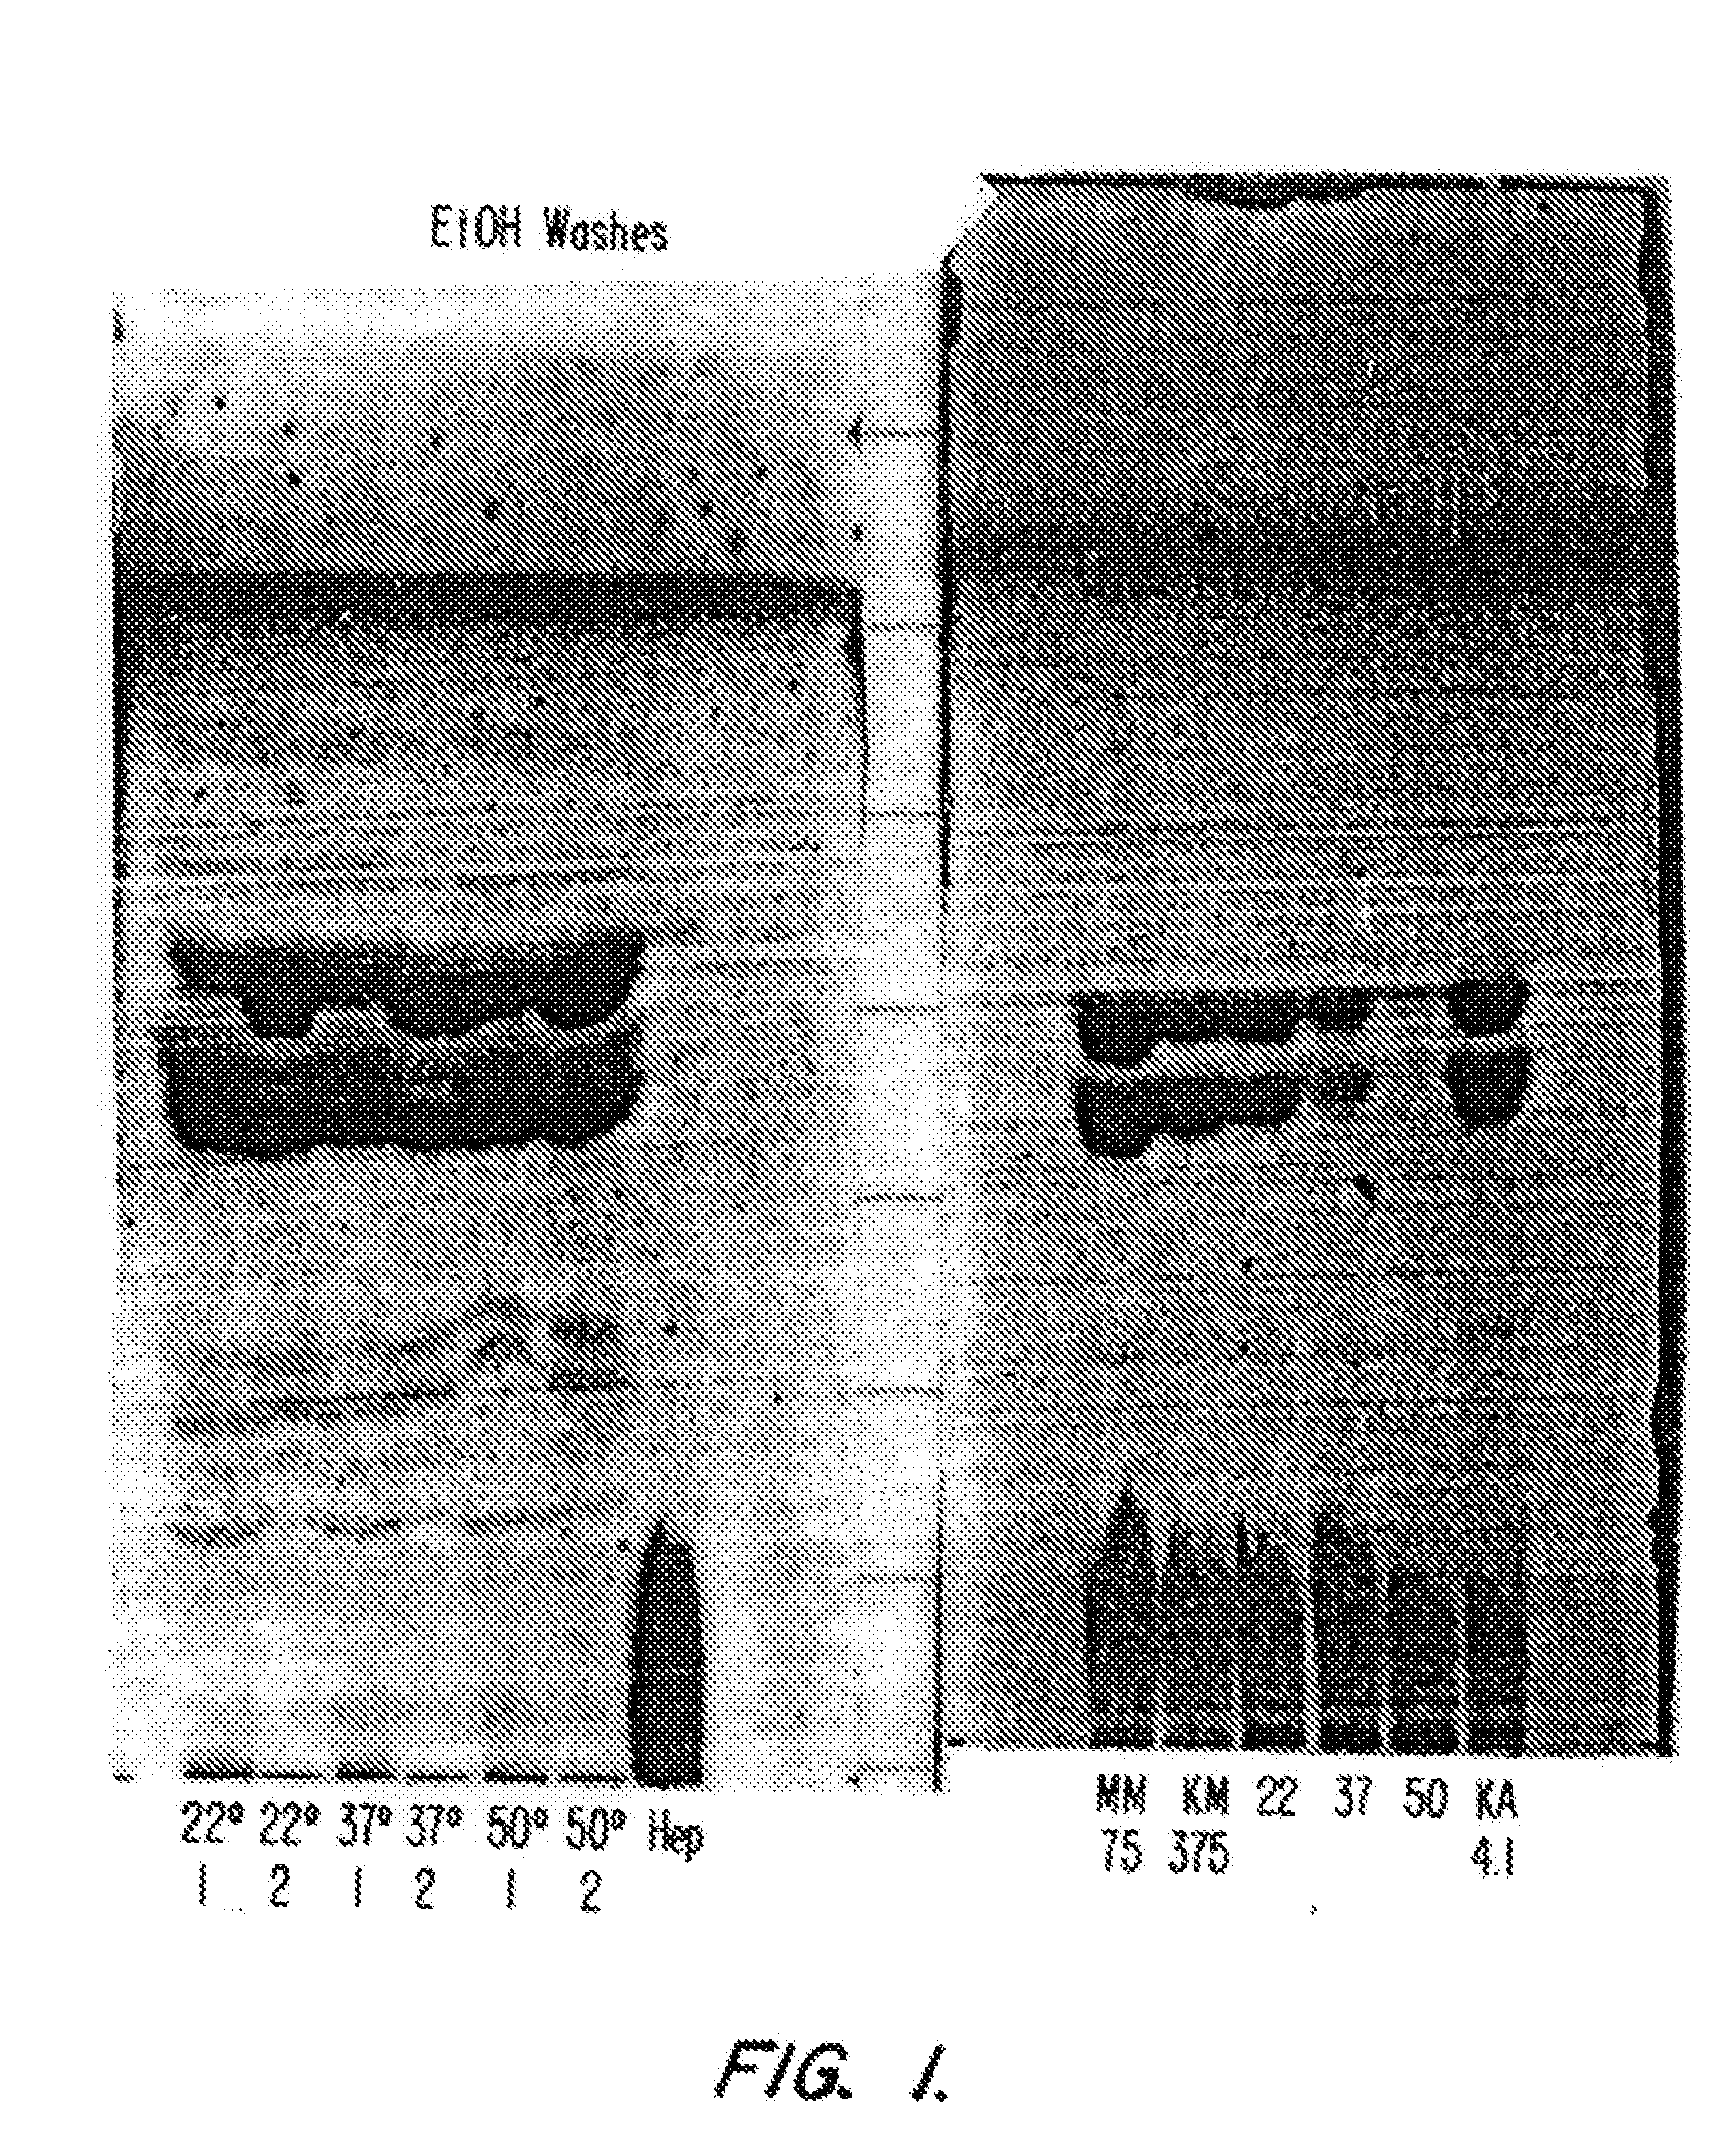 Methods for the production of 3-o-deactivated-4'-monophosphoryl lipid a (3d-mla)